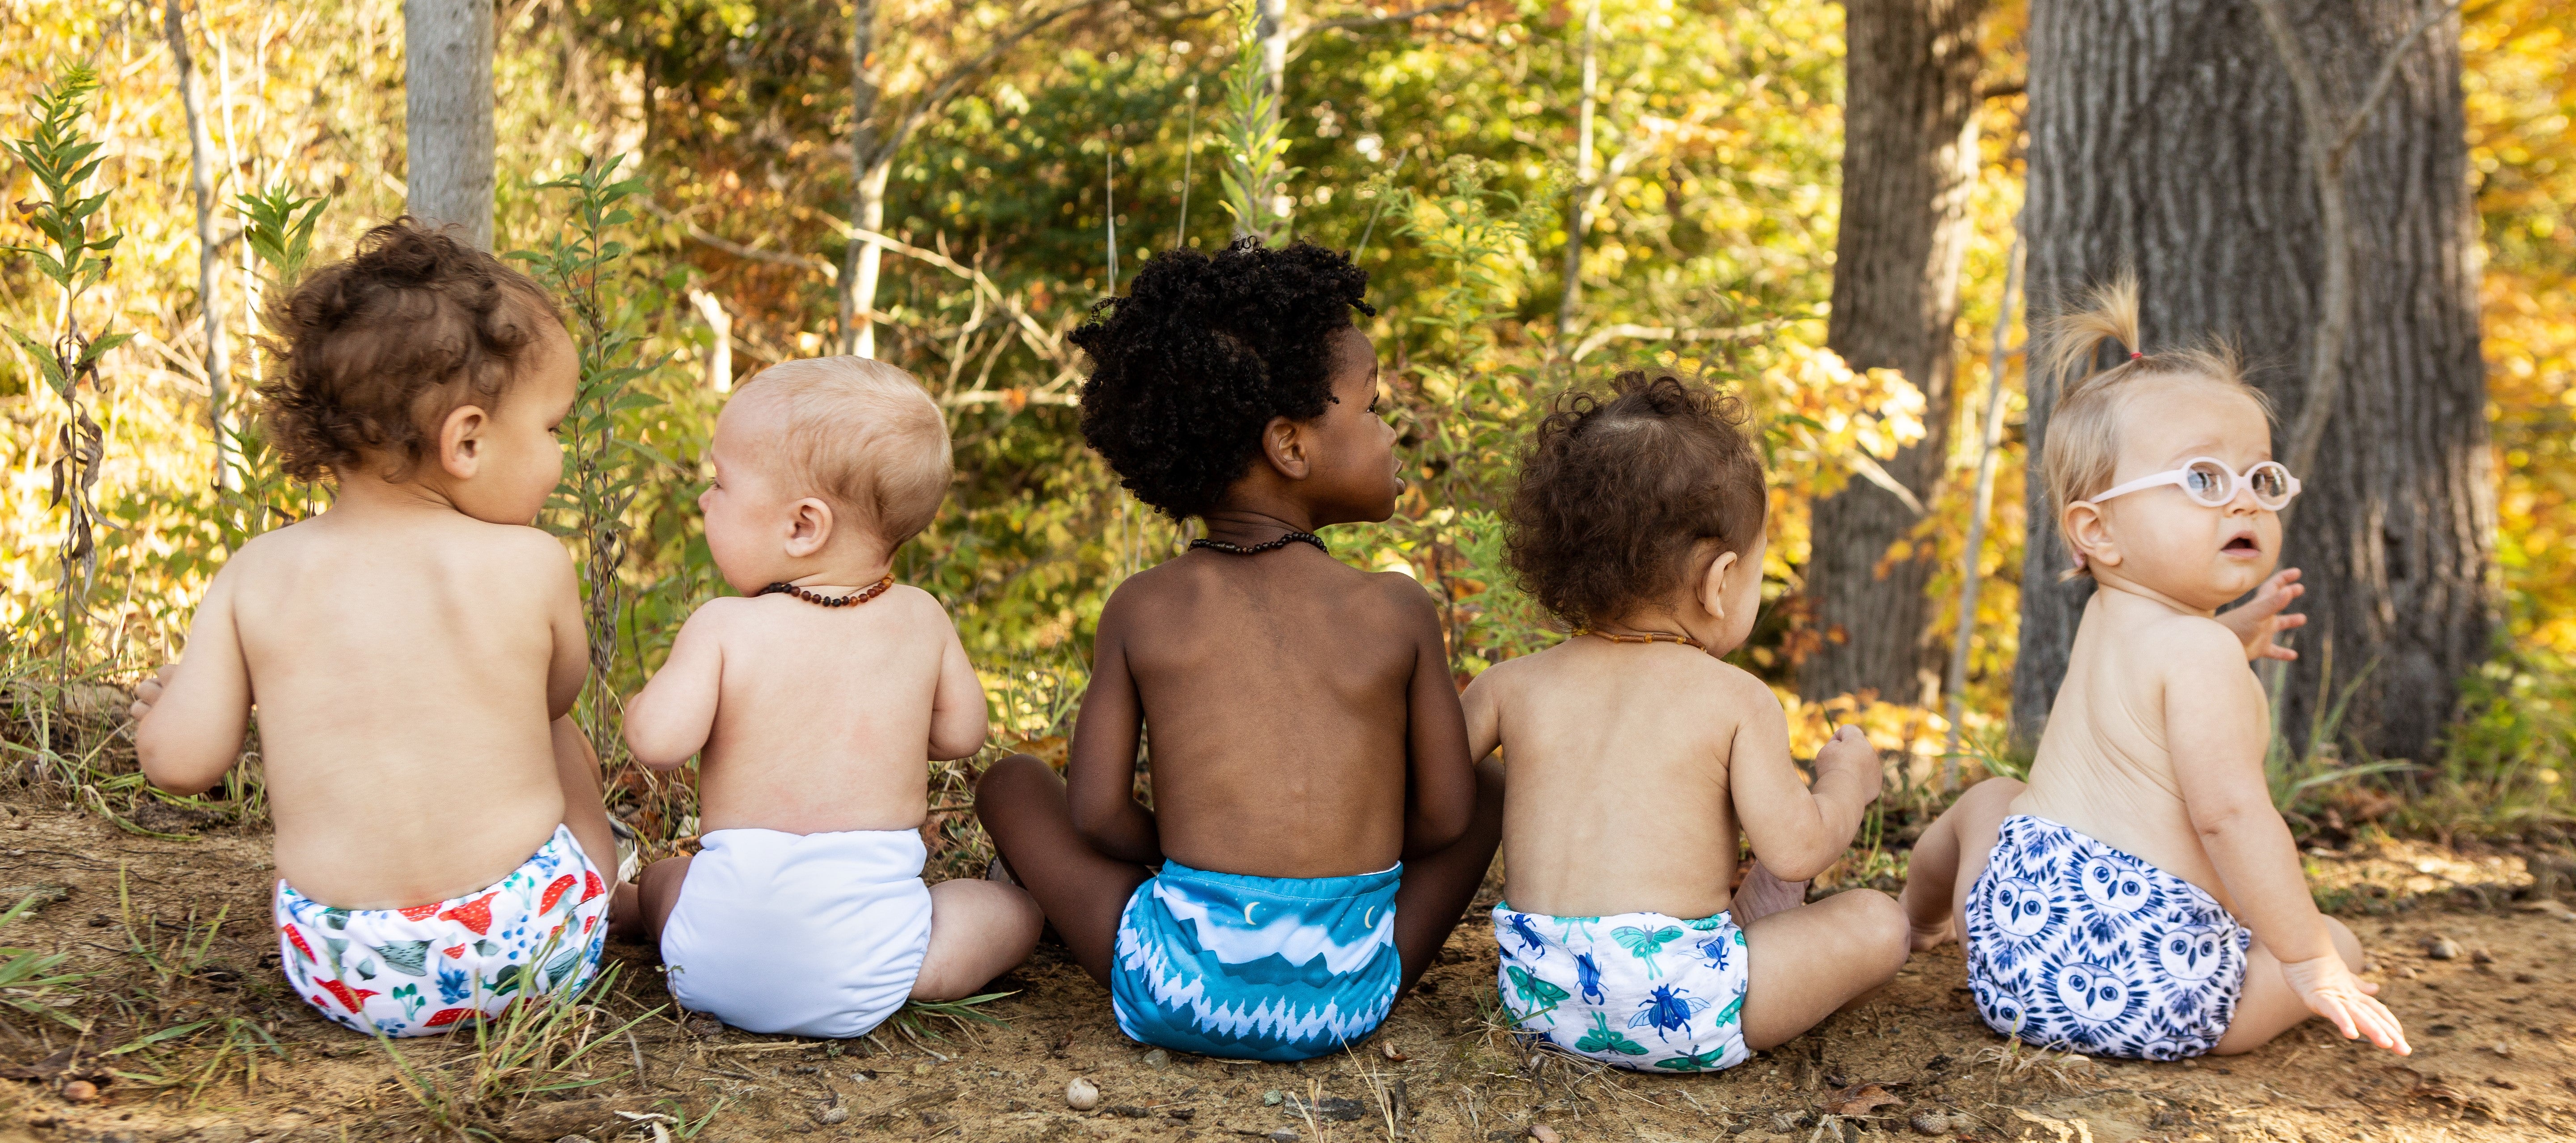 Image of five babies in a forest setting wearing Thirsties diapers in prints: Forest Frolic, Ice Blue, Mountain Twilight, Arthropoda, and Night Owl.